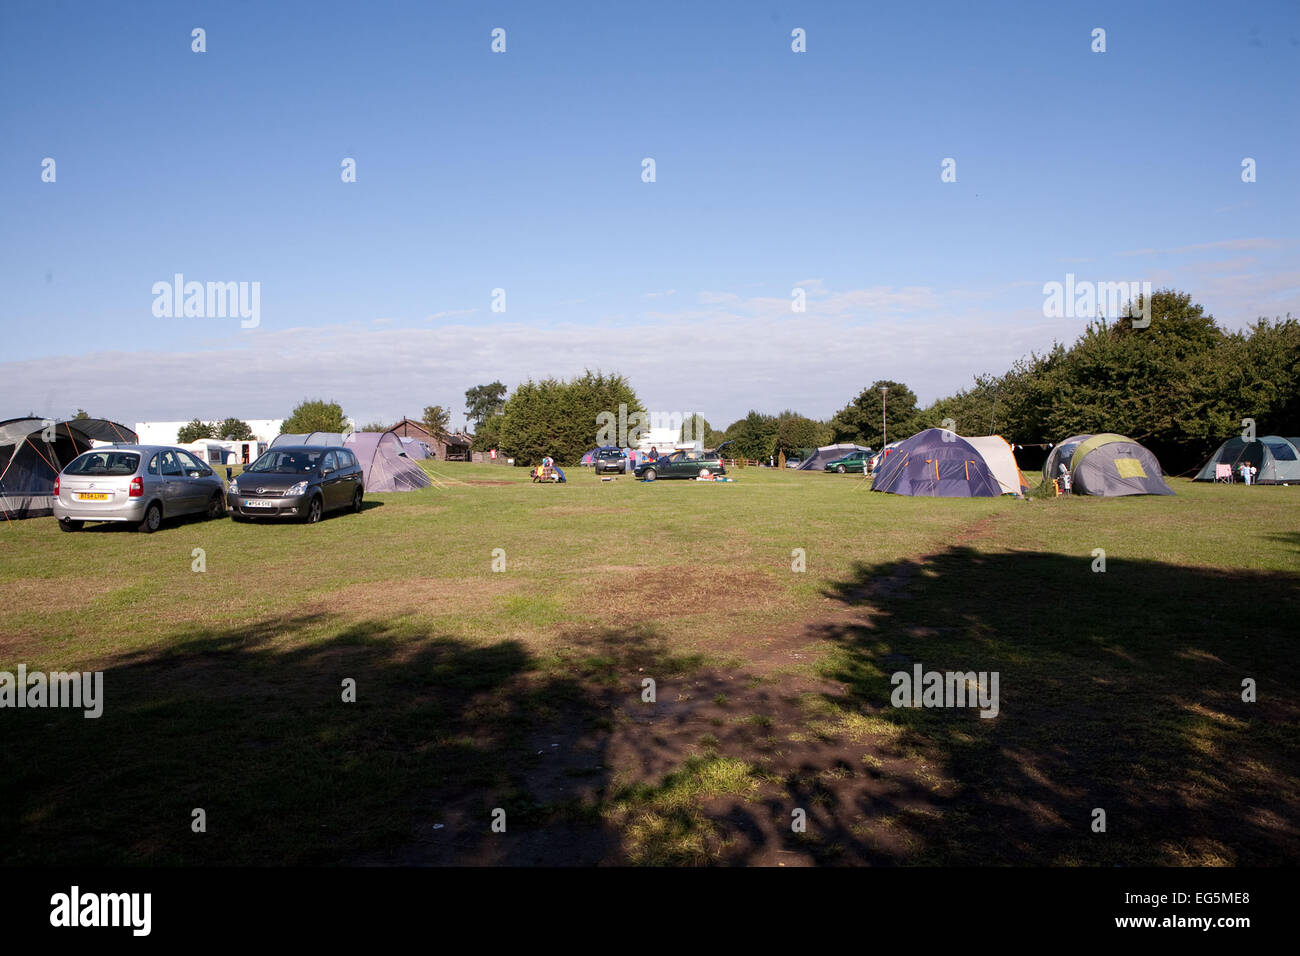 A camp site in lea valley, where holiday makers stays during the summer period, In London, England Stock Photo